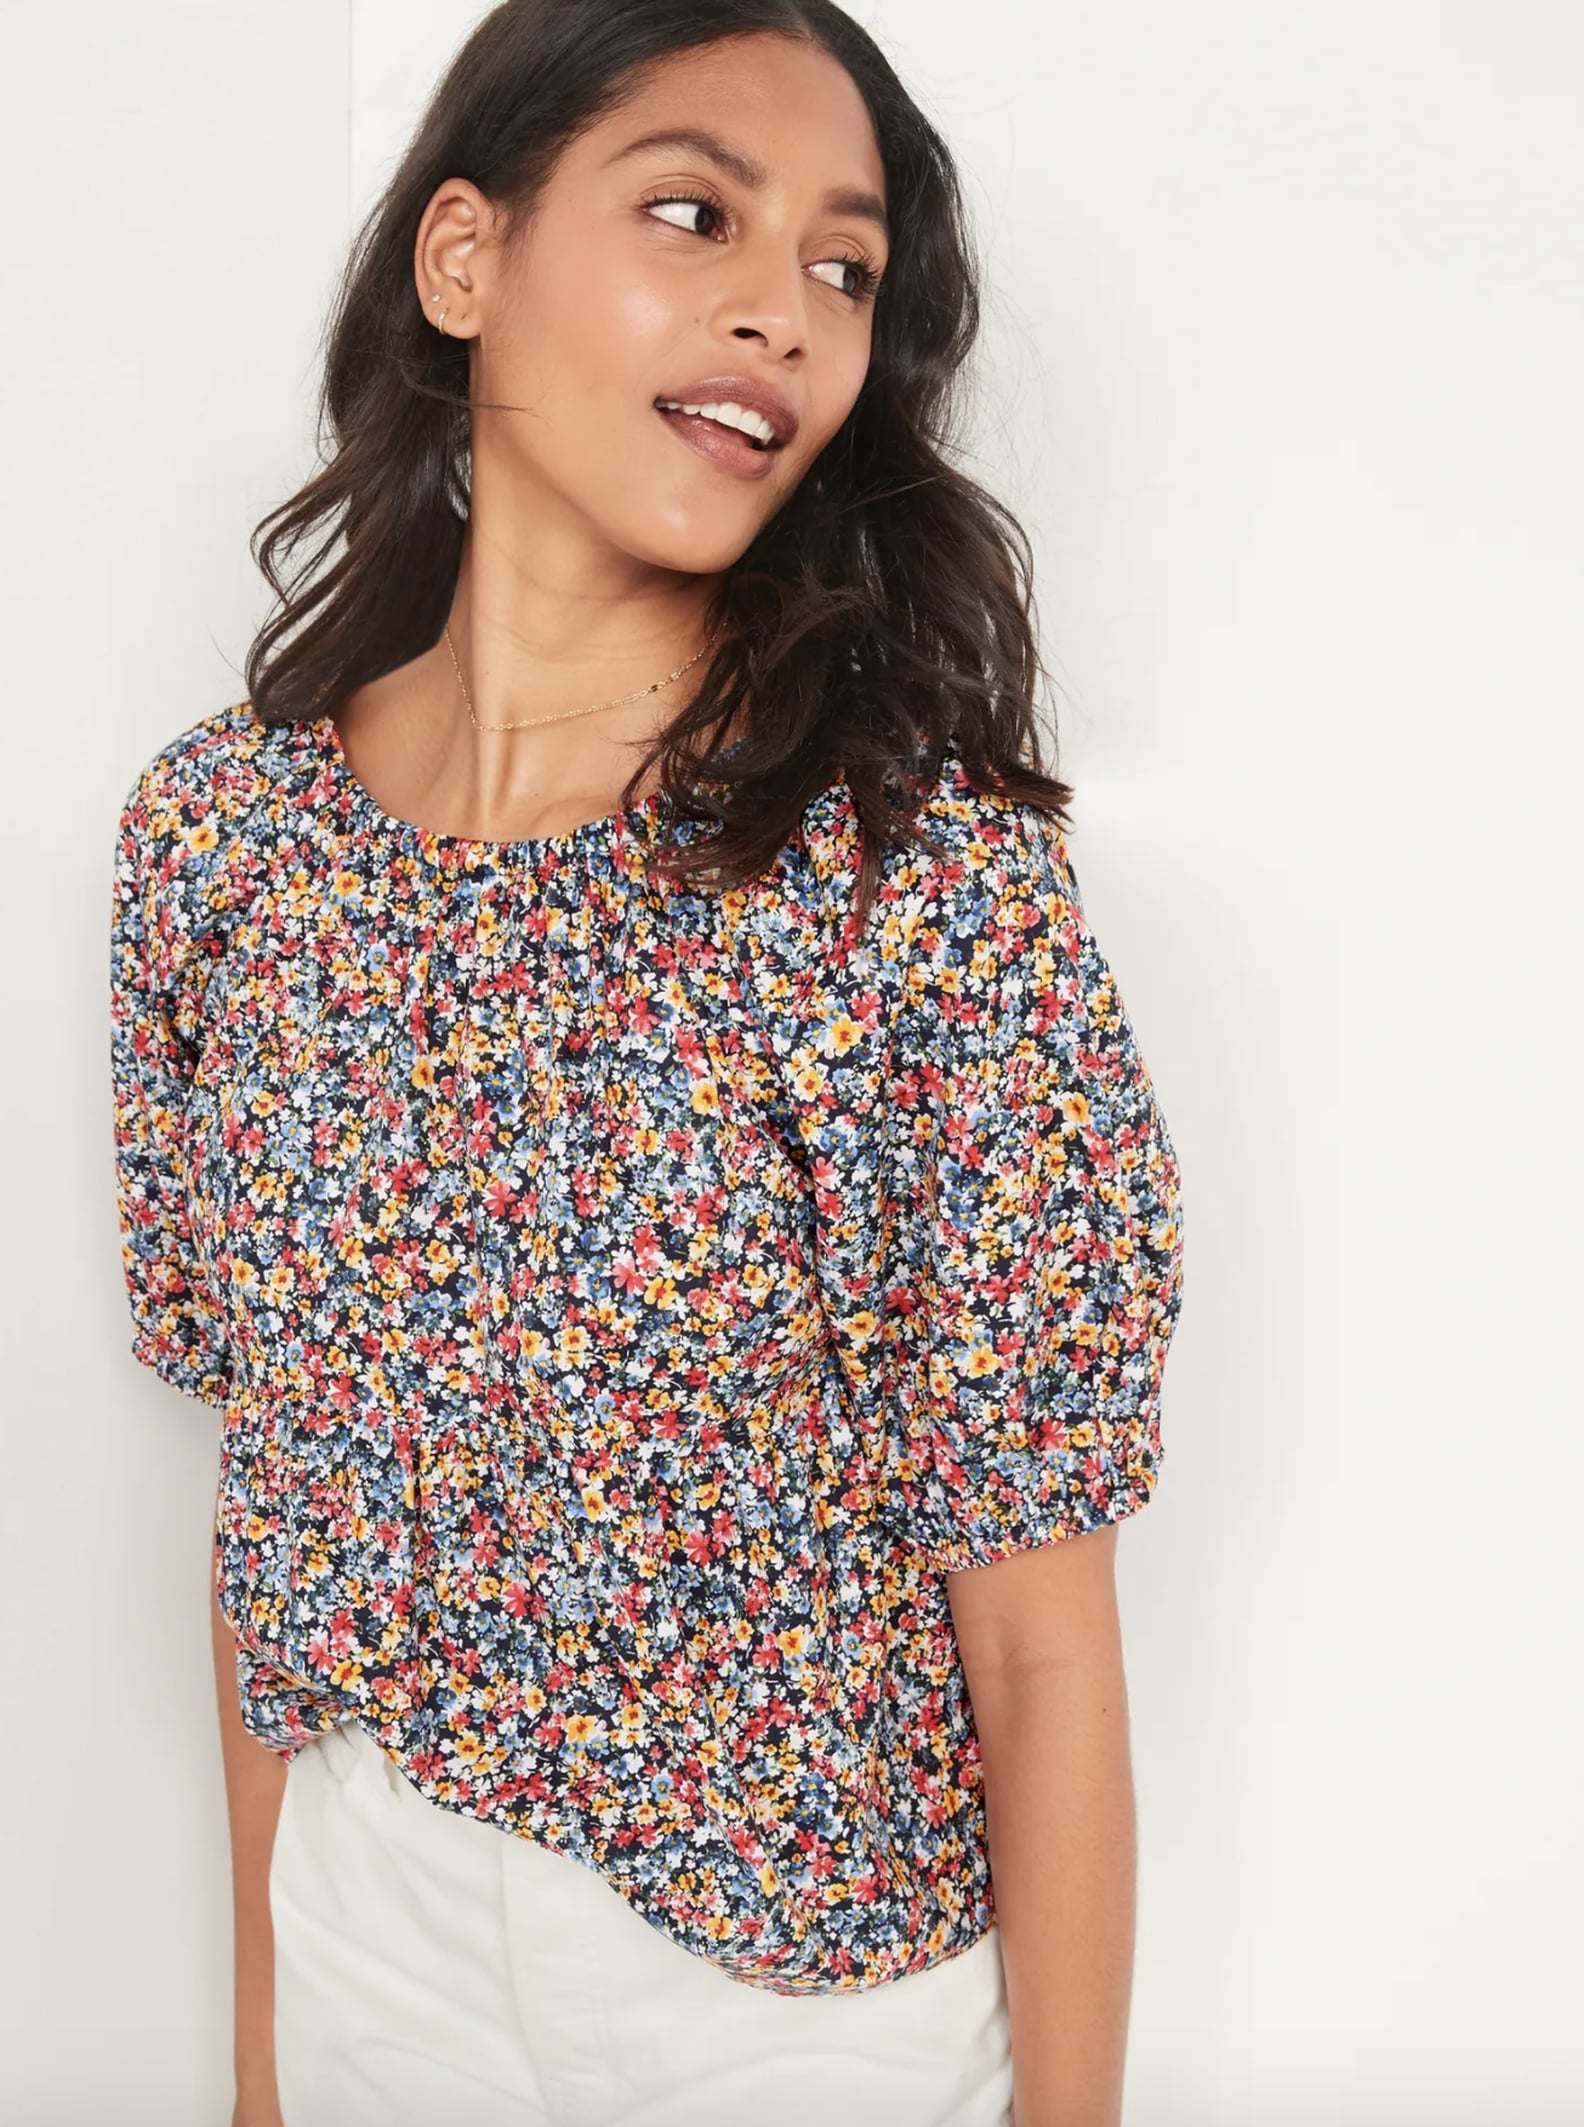 Spring Clothes From Old Navy | POPSUGAR Fashion